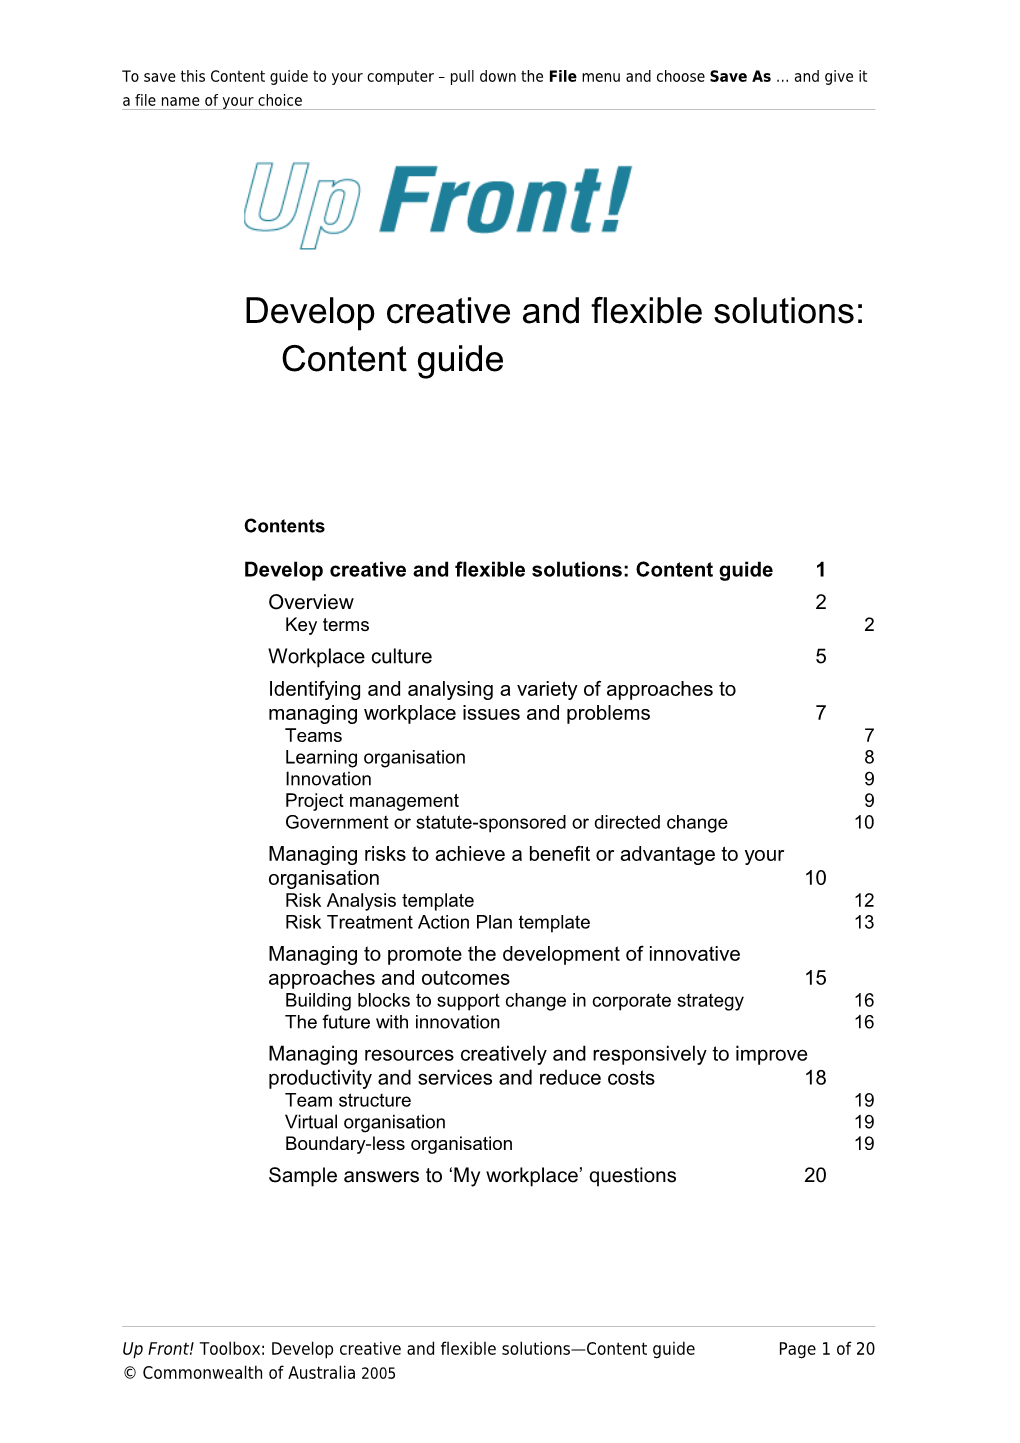 Develop Creative and Flexible Solutions:Content Guide